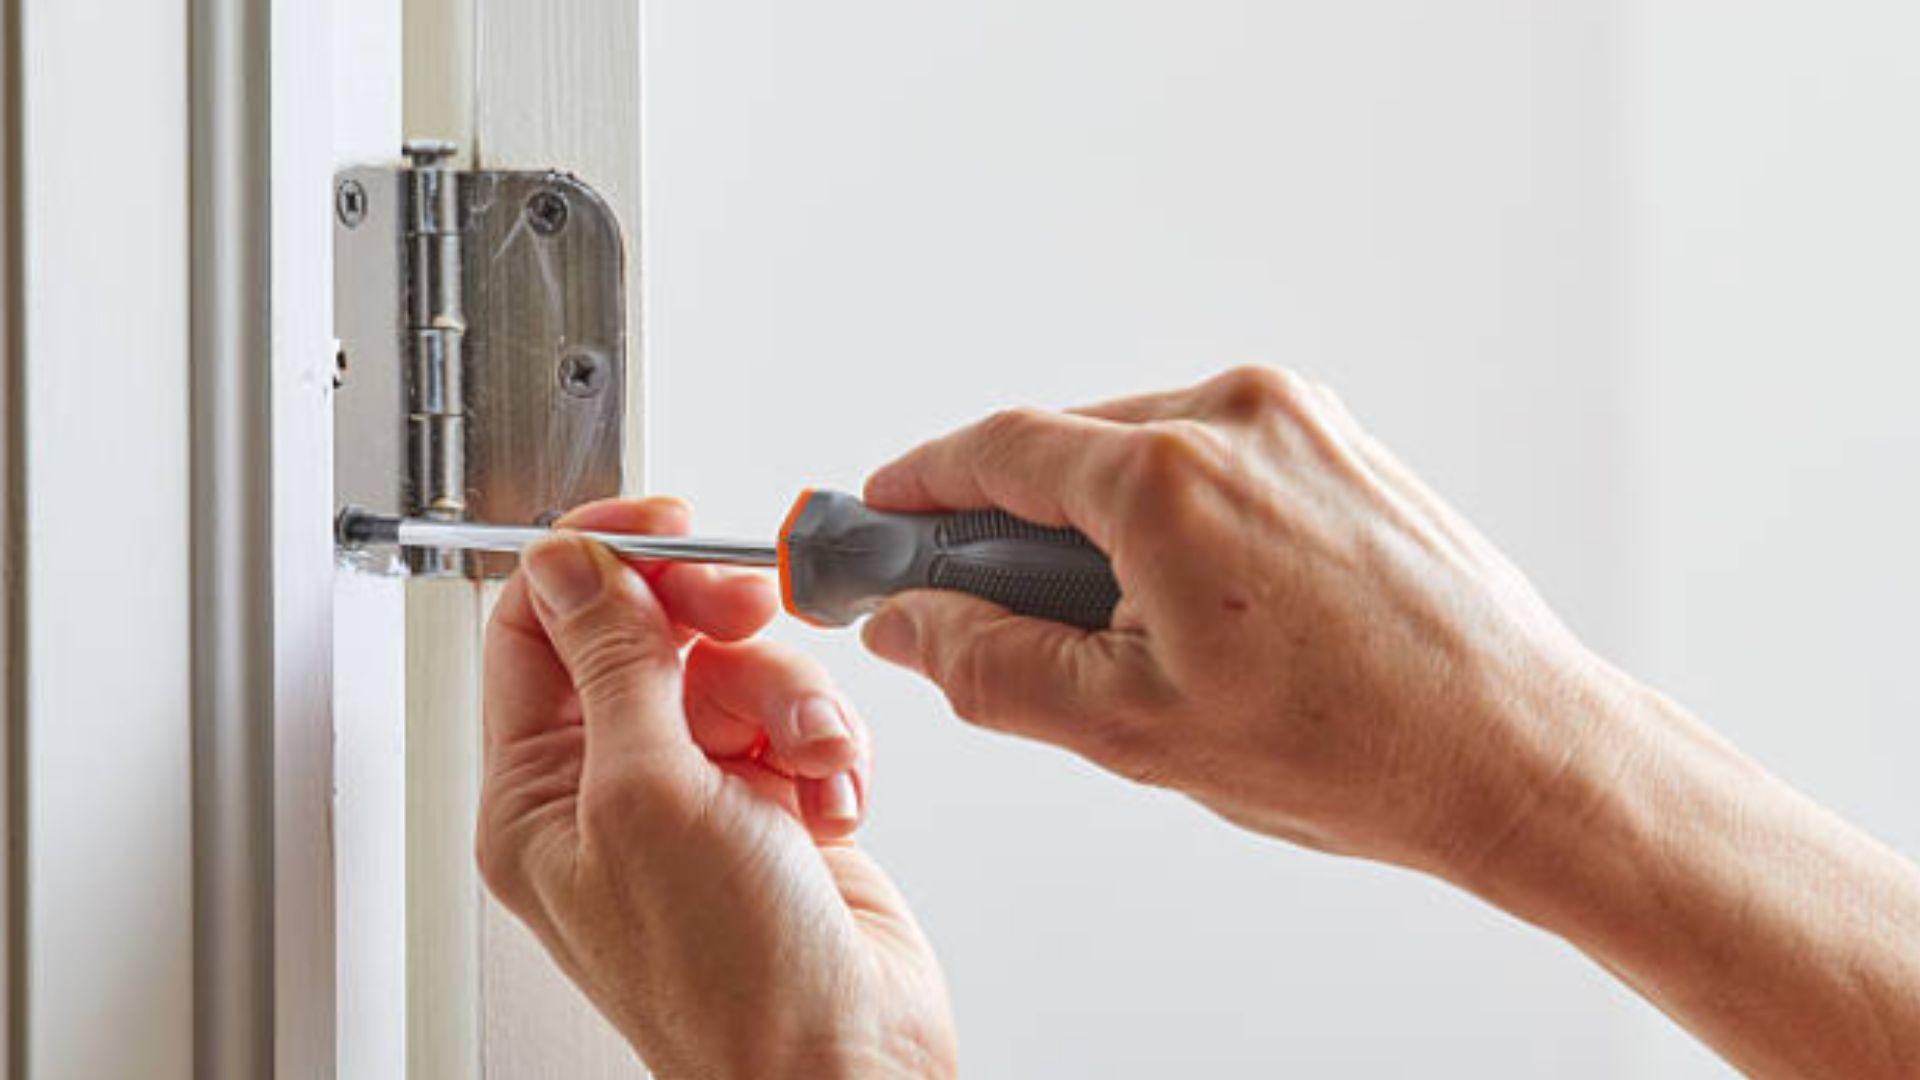 How to install hinges on a door